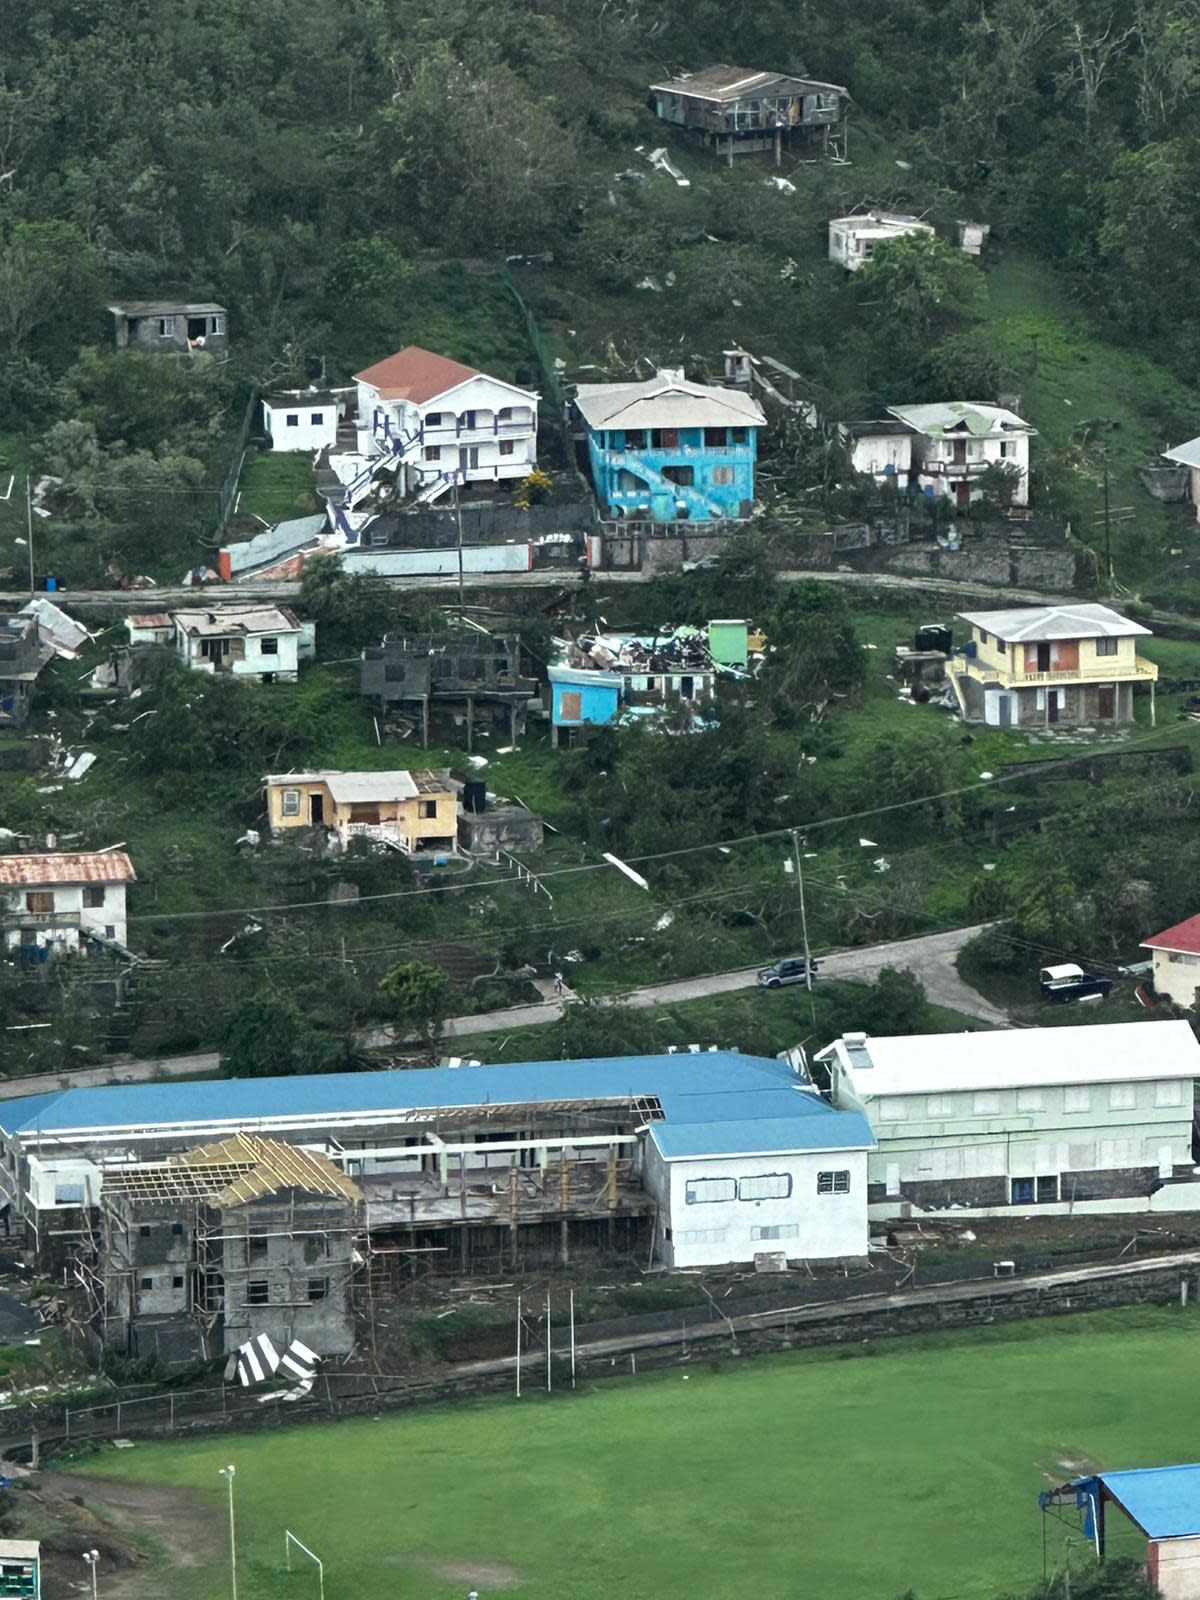 Hurricane Beryl destroyed several homes, pictured, on the island of Bequia (Louis Wilson/Provided)